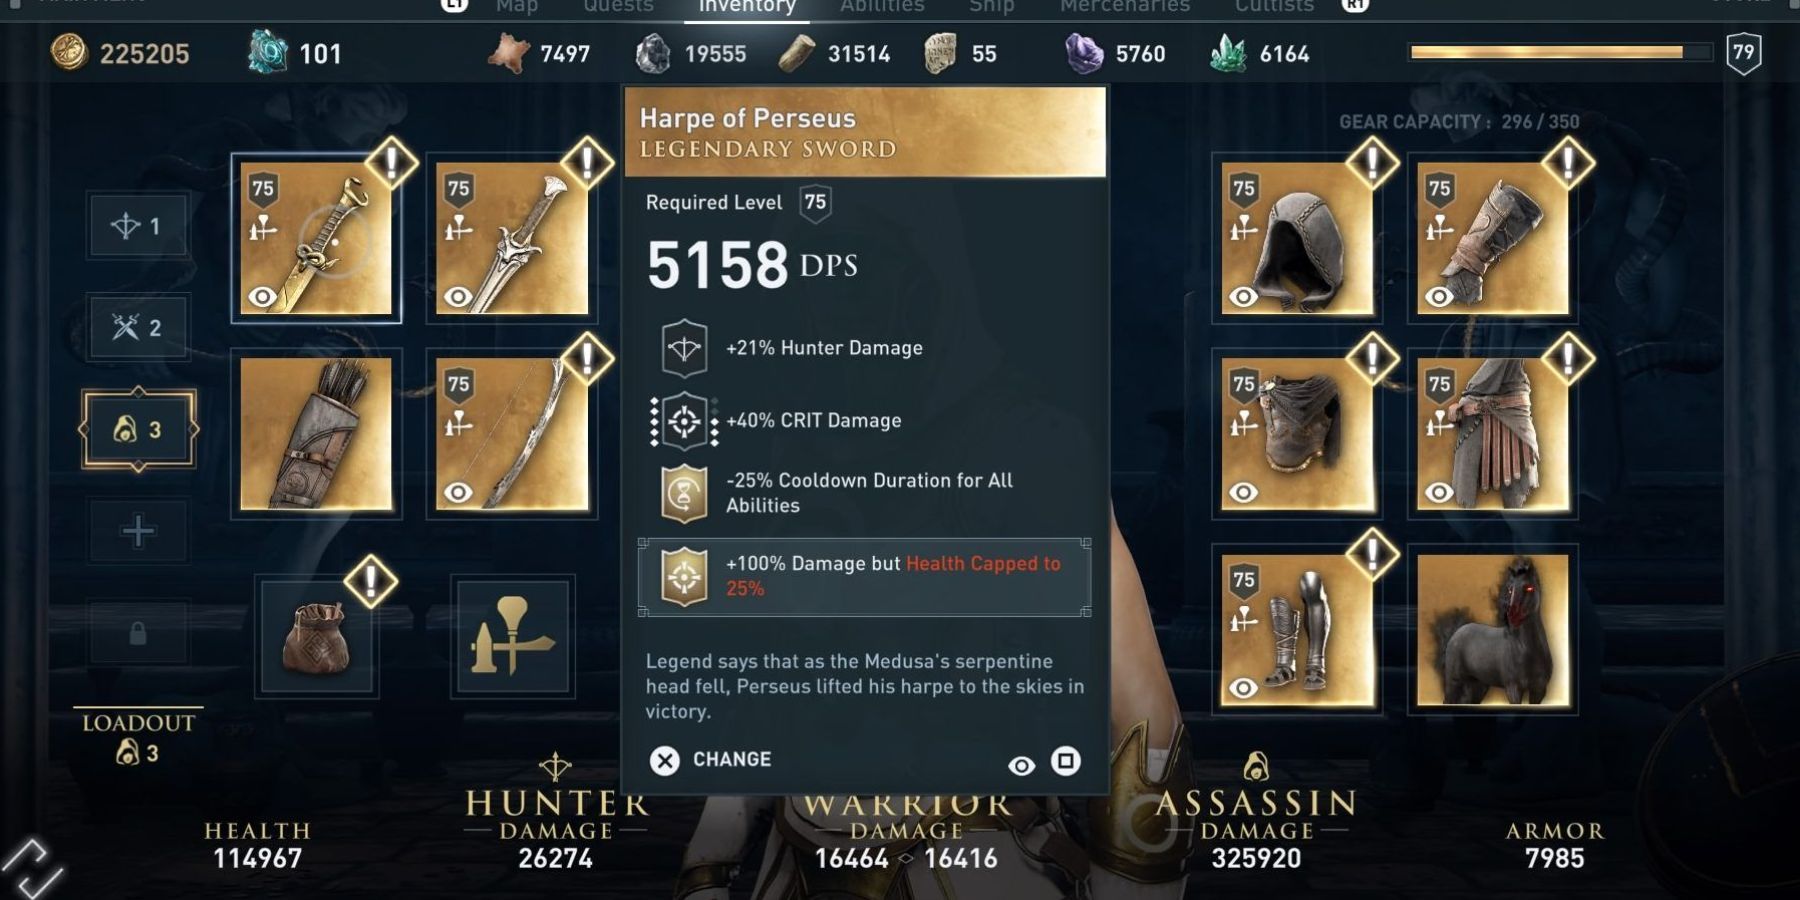 Assassin's Creed Odyssey Harpe of Perseus